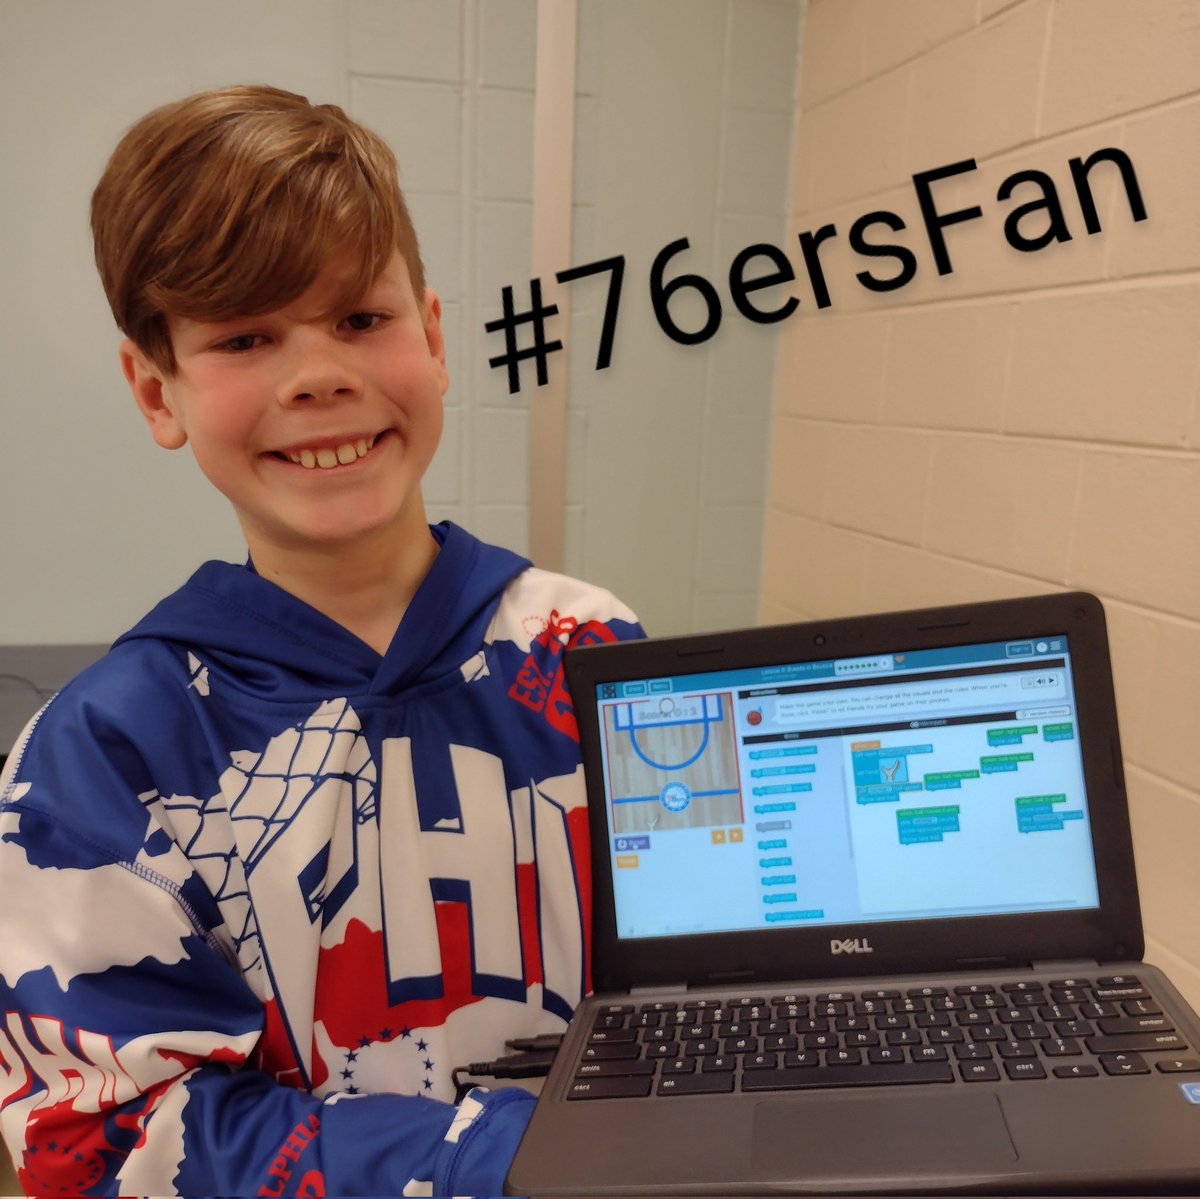 4th Grade students are coding their own basketball games. This one customized his game to match his shirt. #76ersFan #penndelcoproud @CoebournES